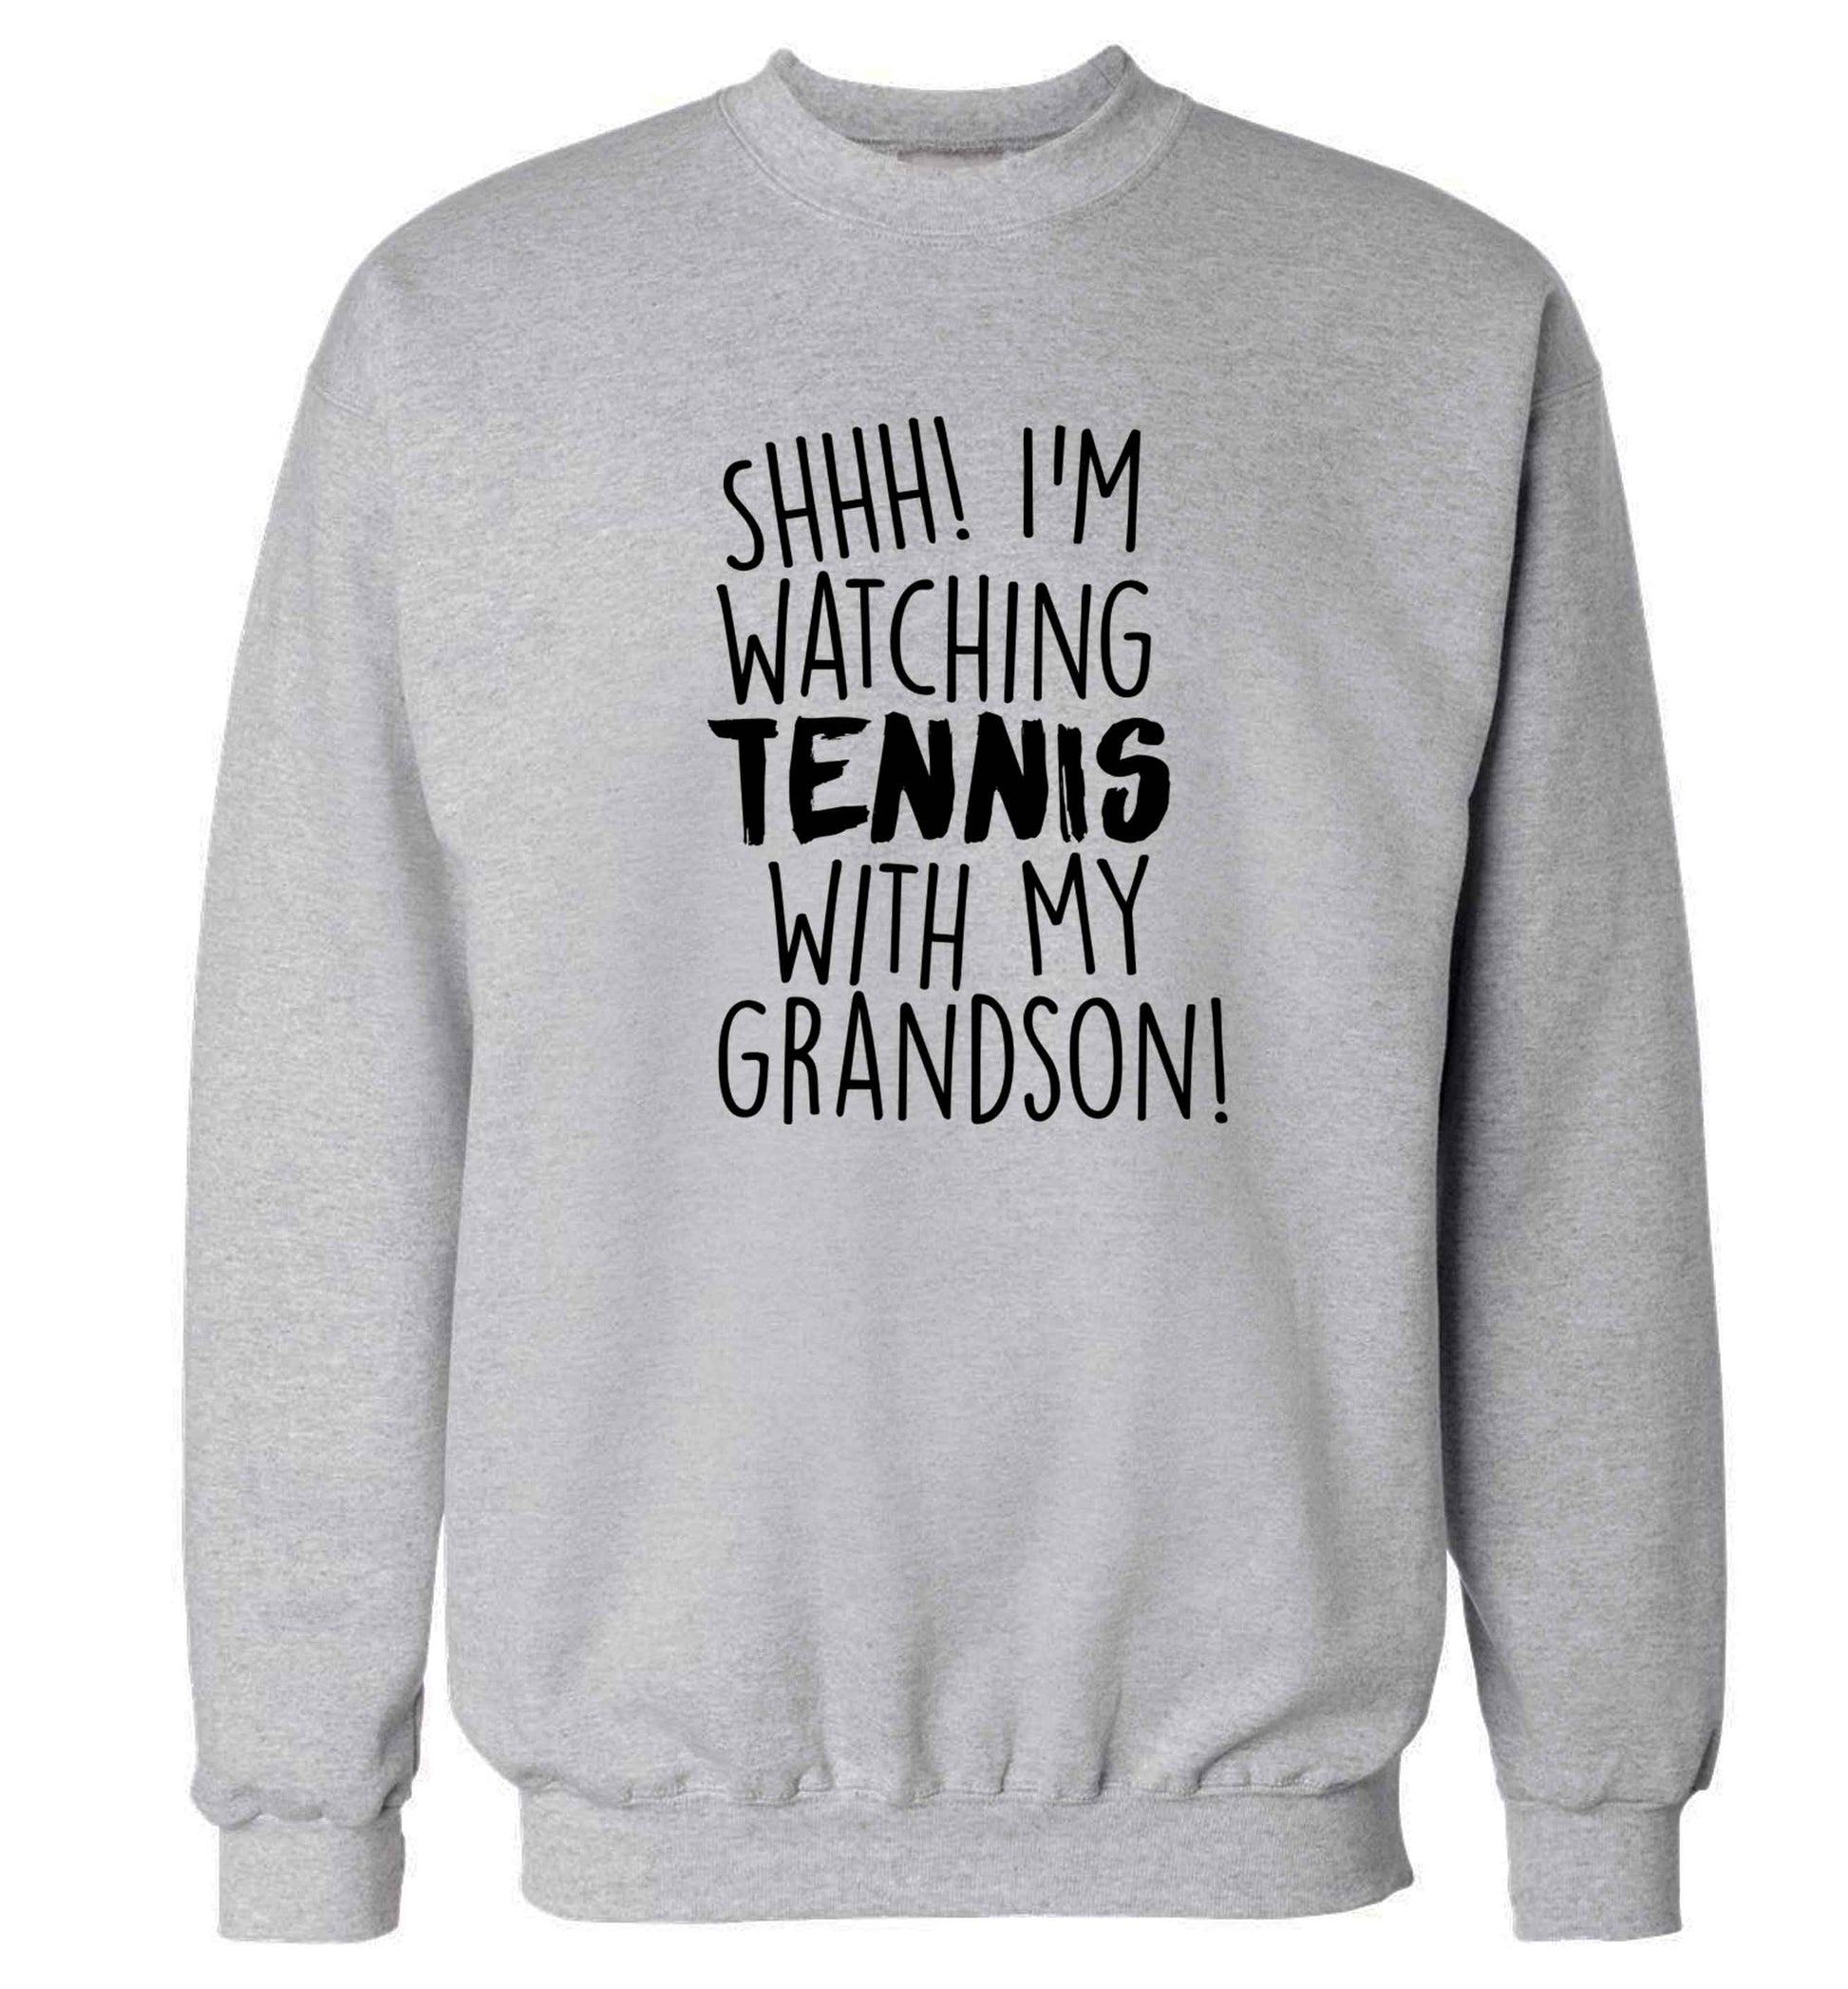 Shh! I'm watching tennis with my grandson! Adult's unisex grey Sweater 2XL